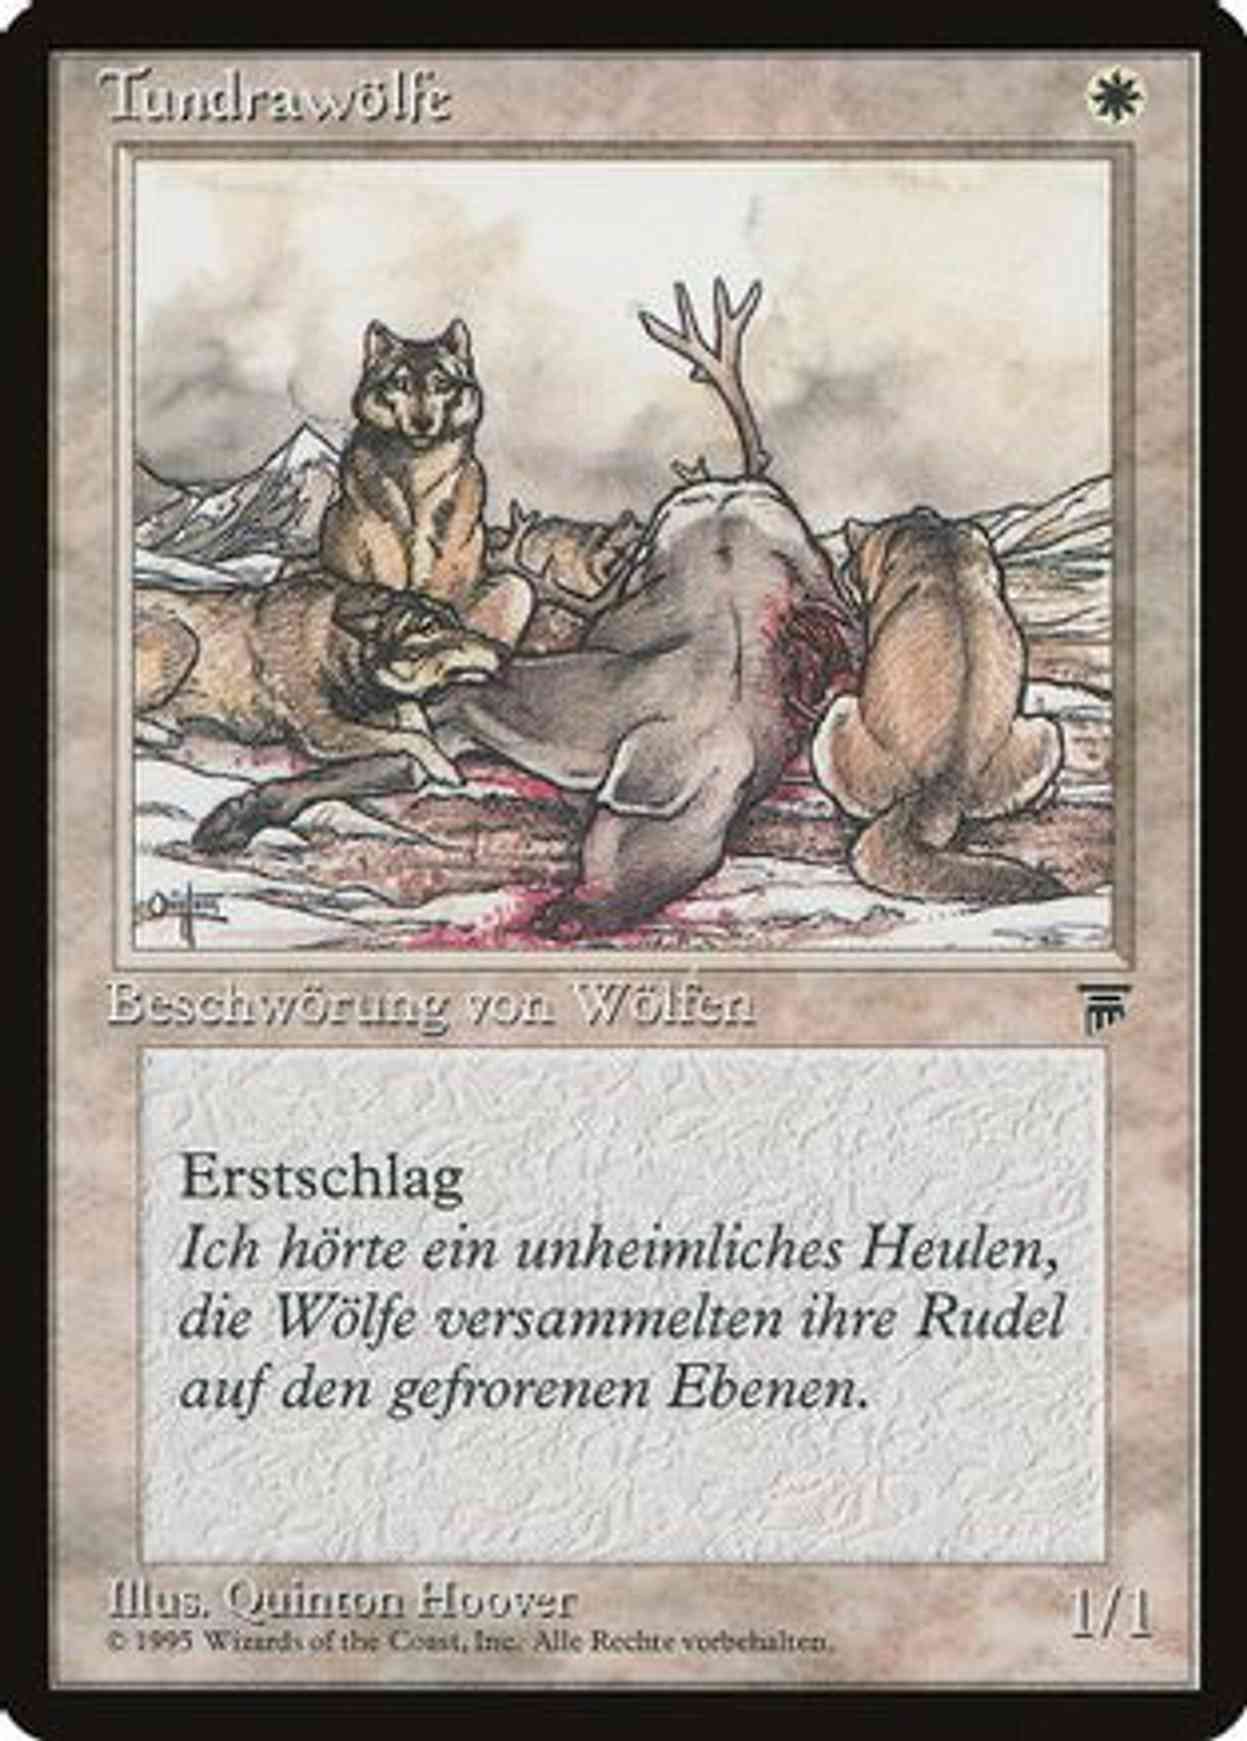 Tundra Wolves (German) - "Tundrawolfe" magic card front